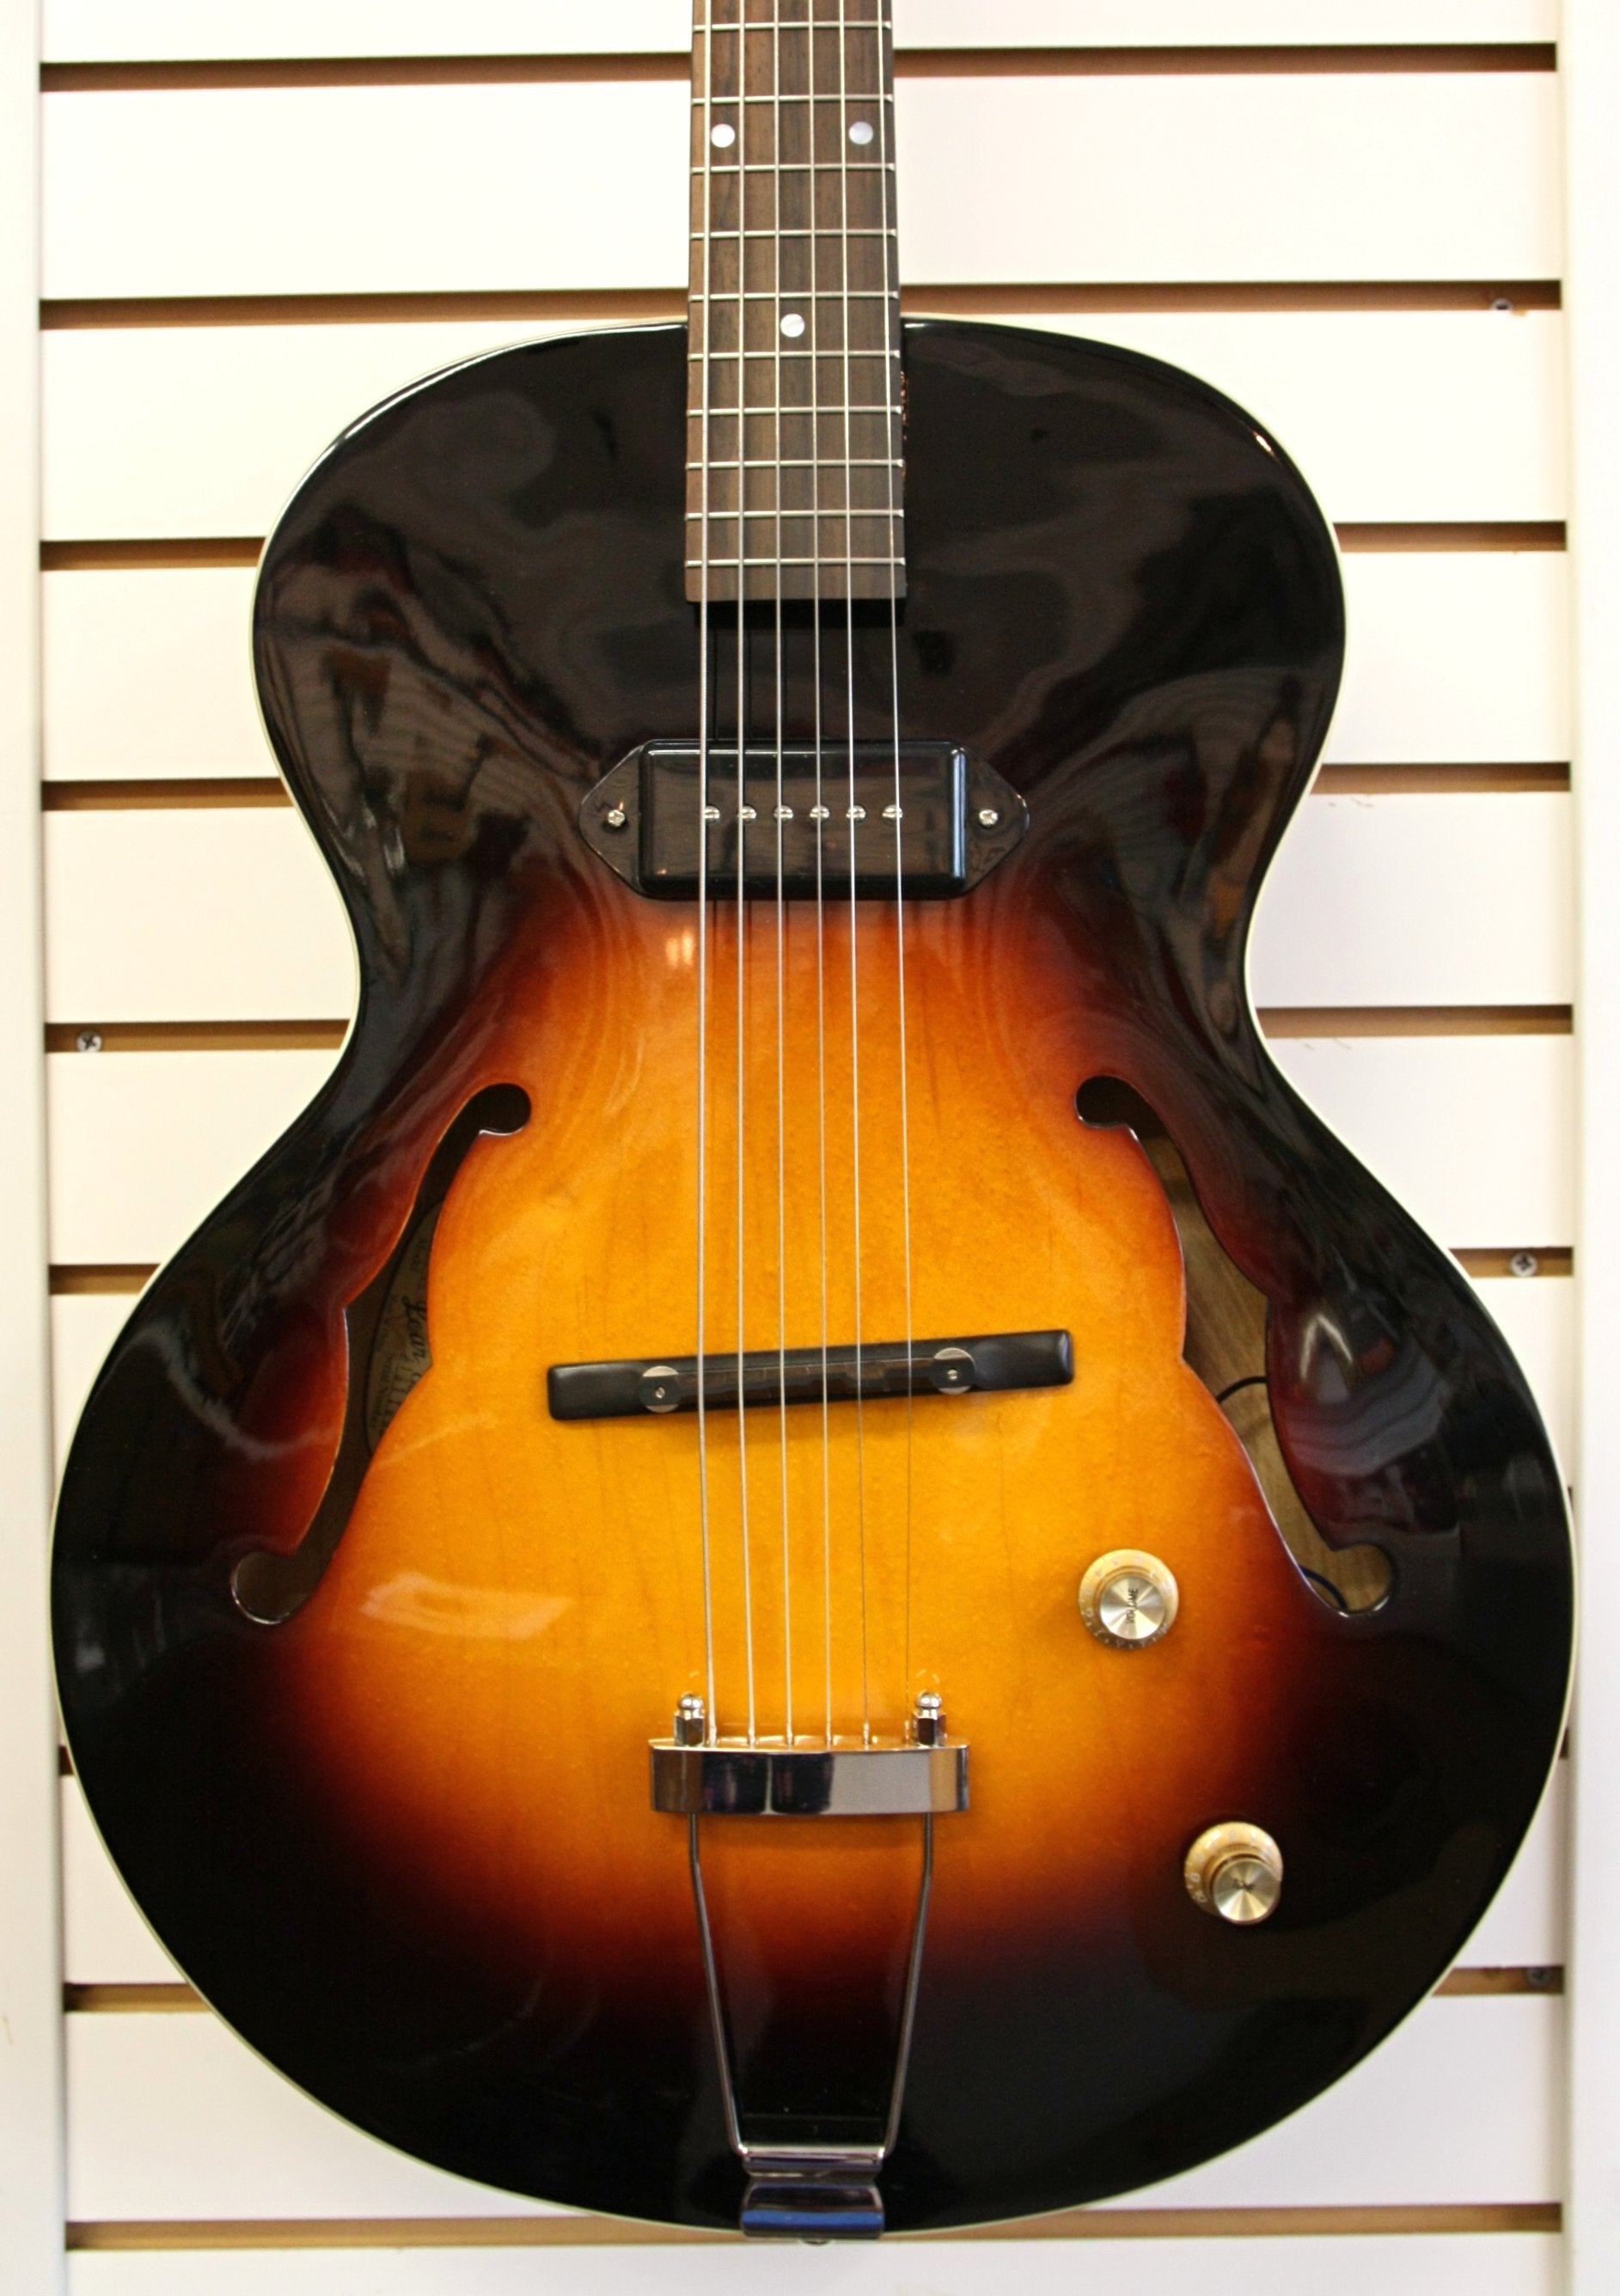 The Loar LH-301-T Thinbody Archtop Electric Guitar